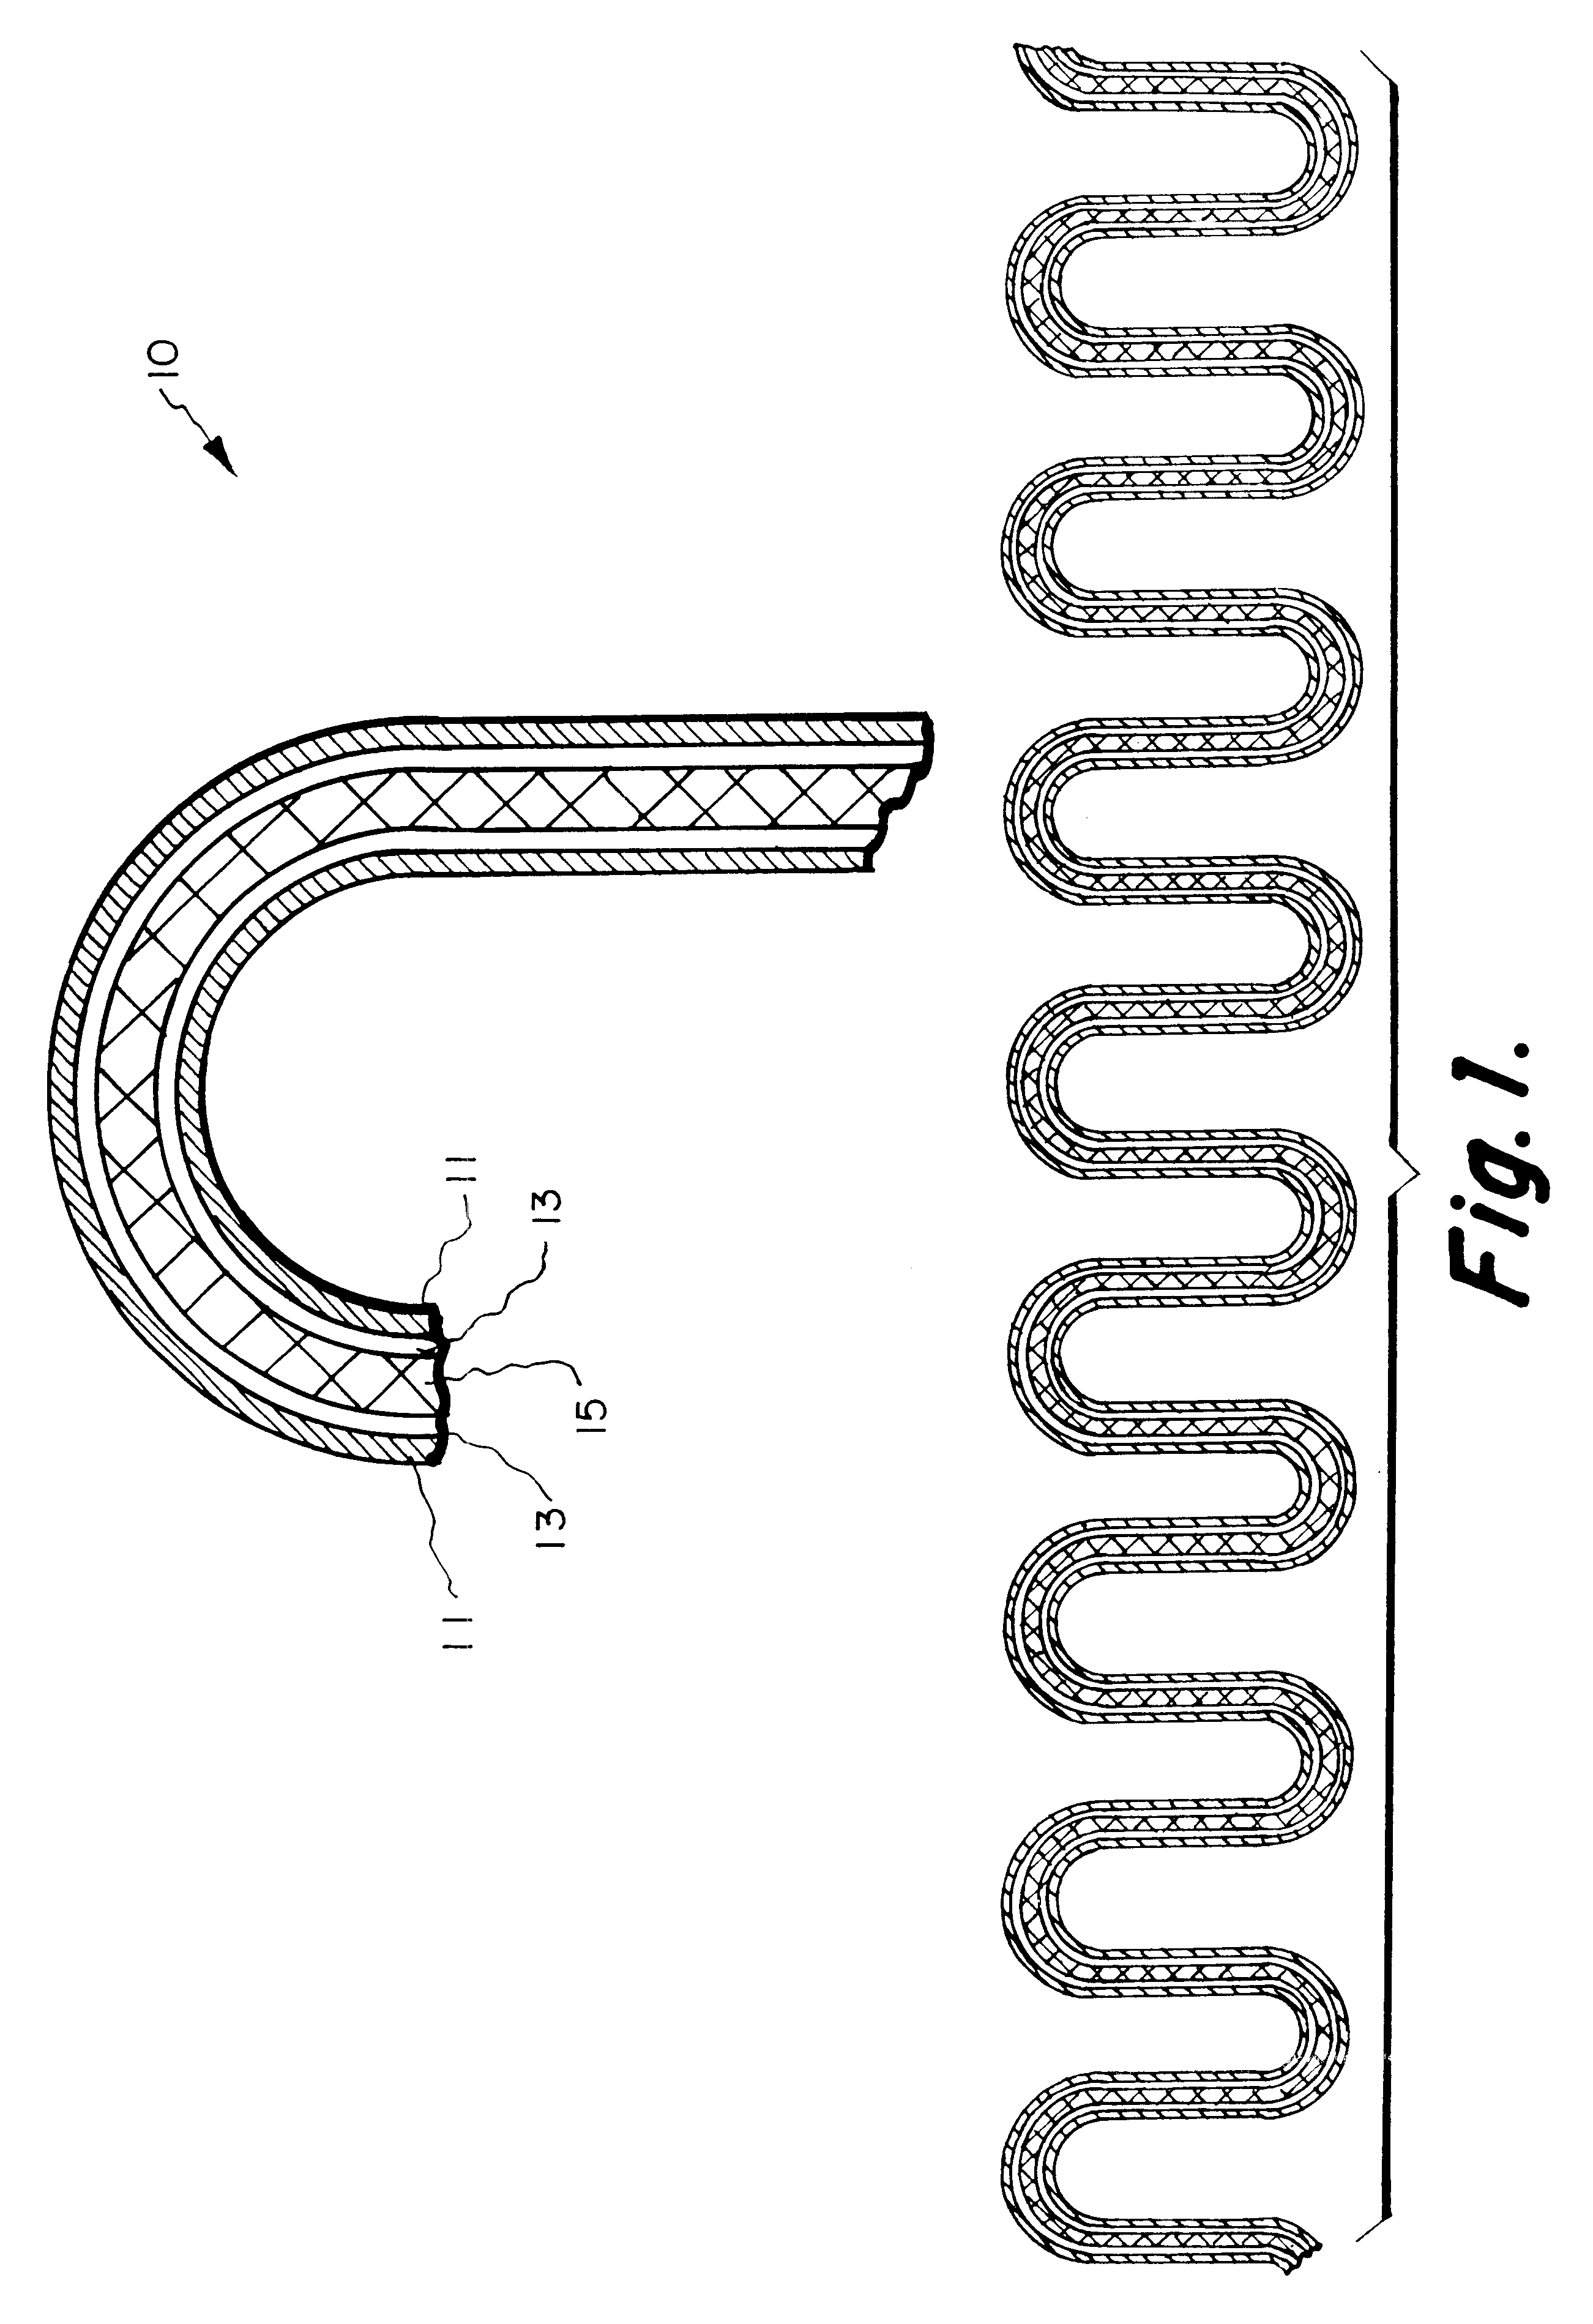 High efficiency active electrostatic air filter and method of manufacture